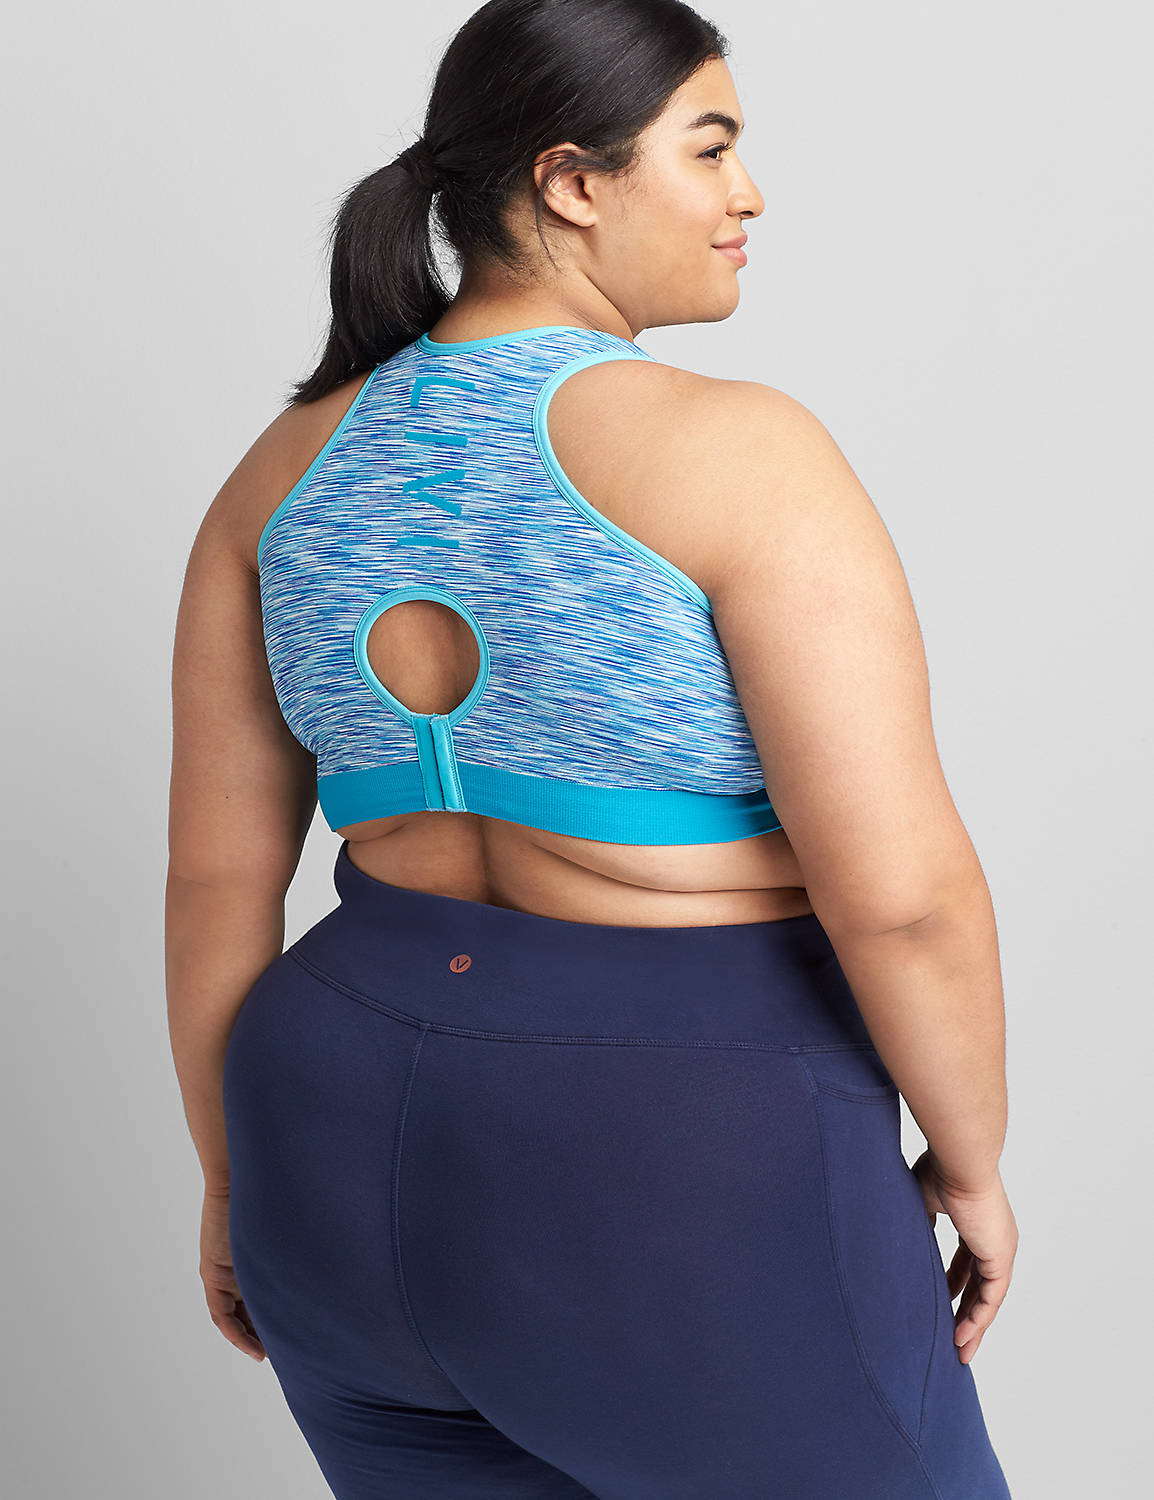 1119725-S Zoned Seamless Space Dye Contrast Sport Bra:Blue space dye - seamless:10/12 Product Image 2